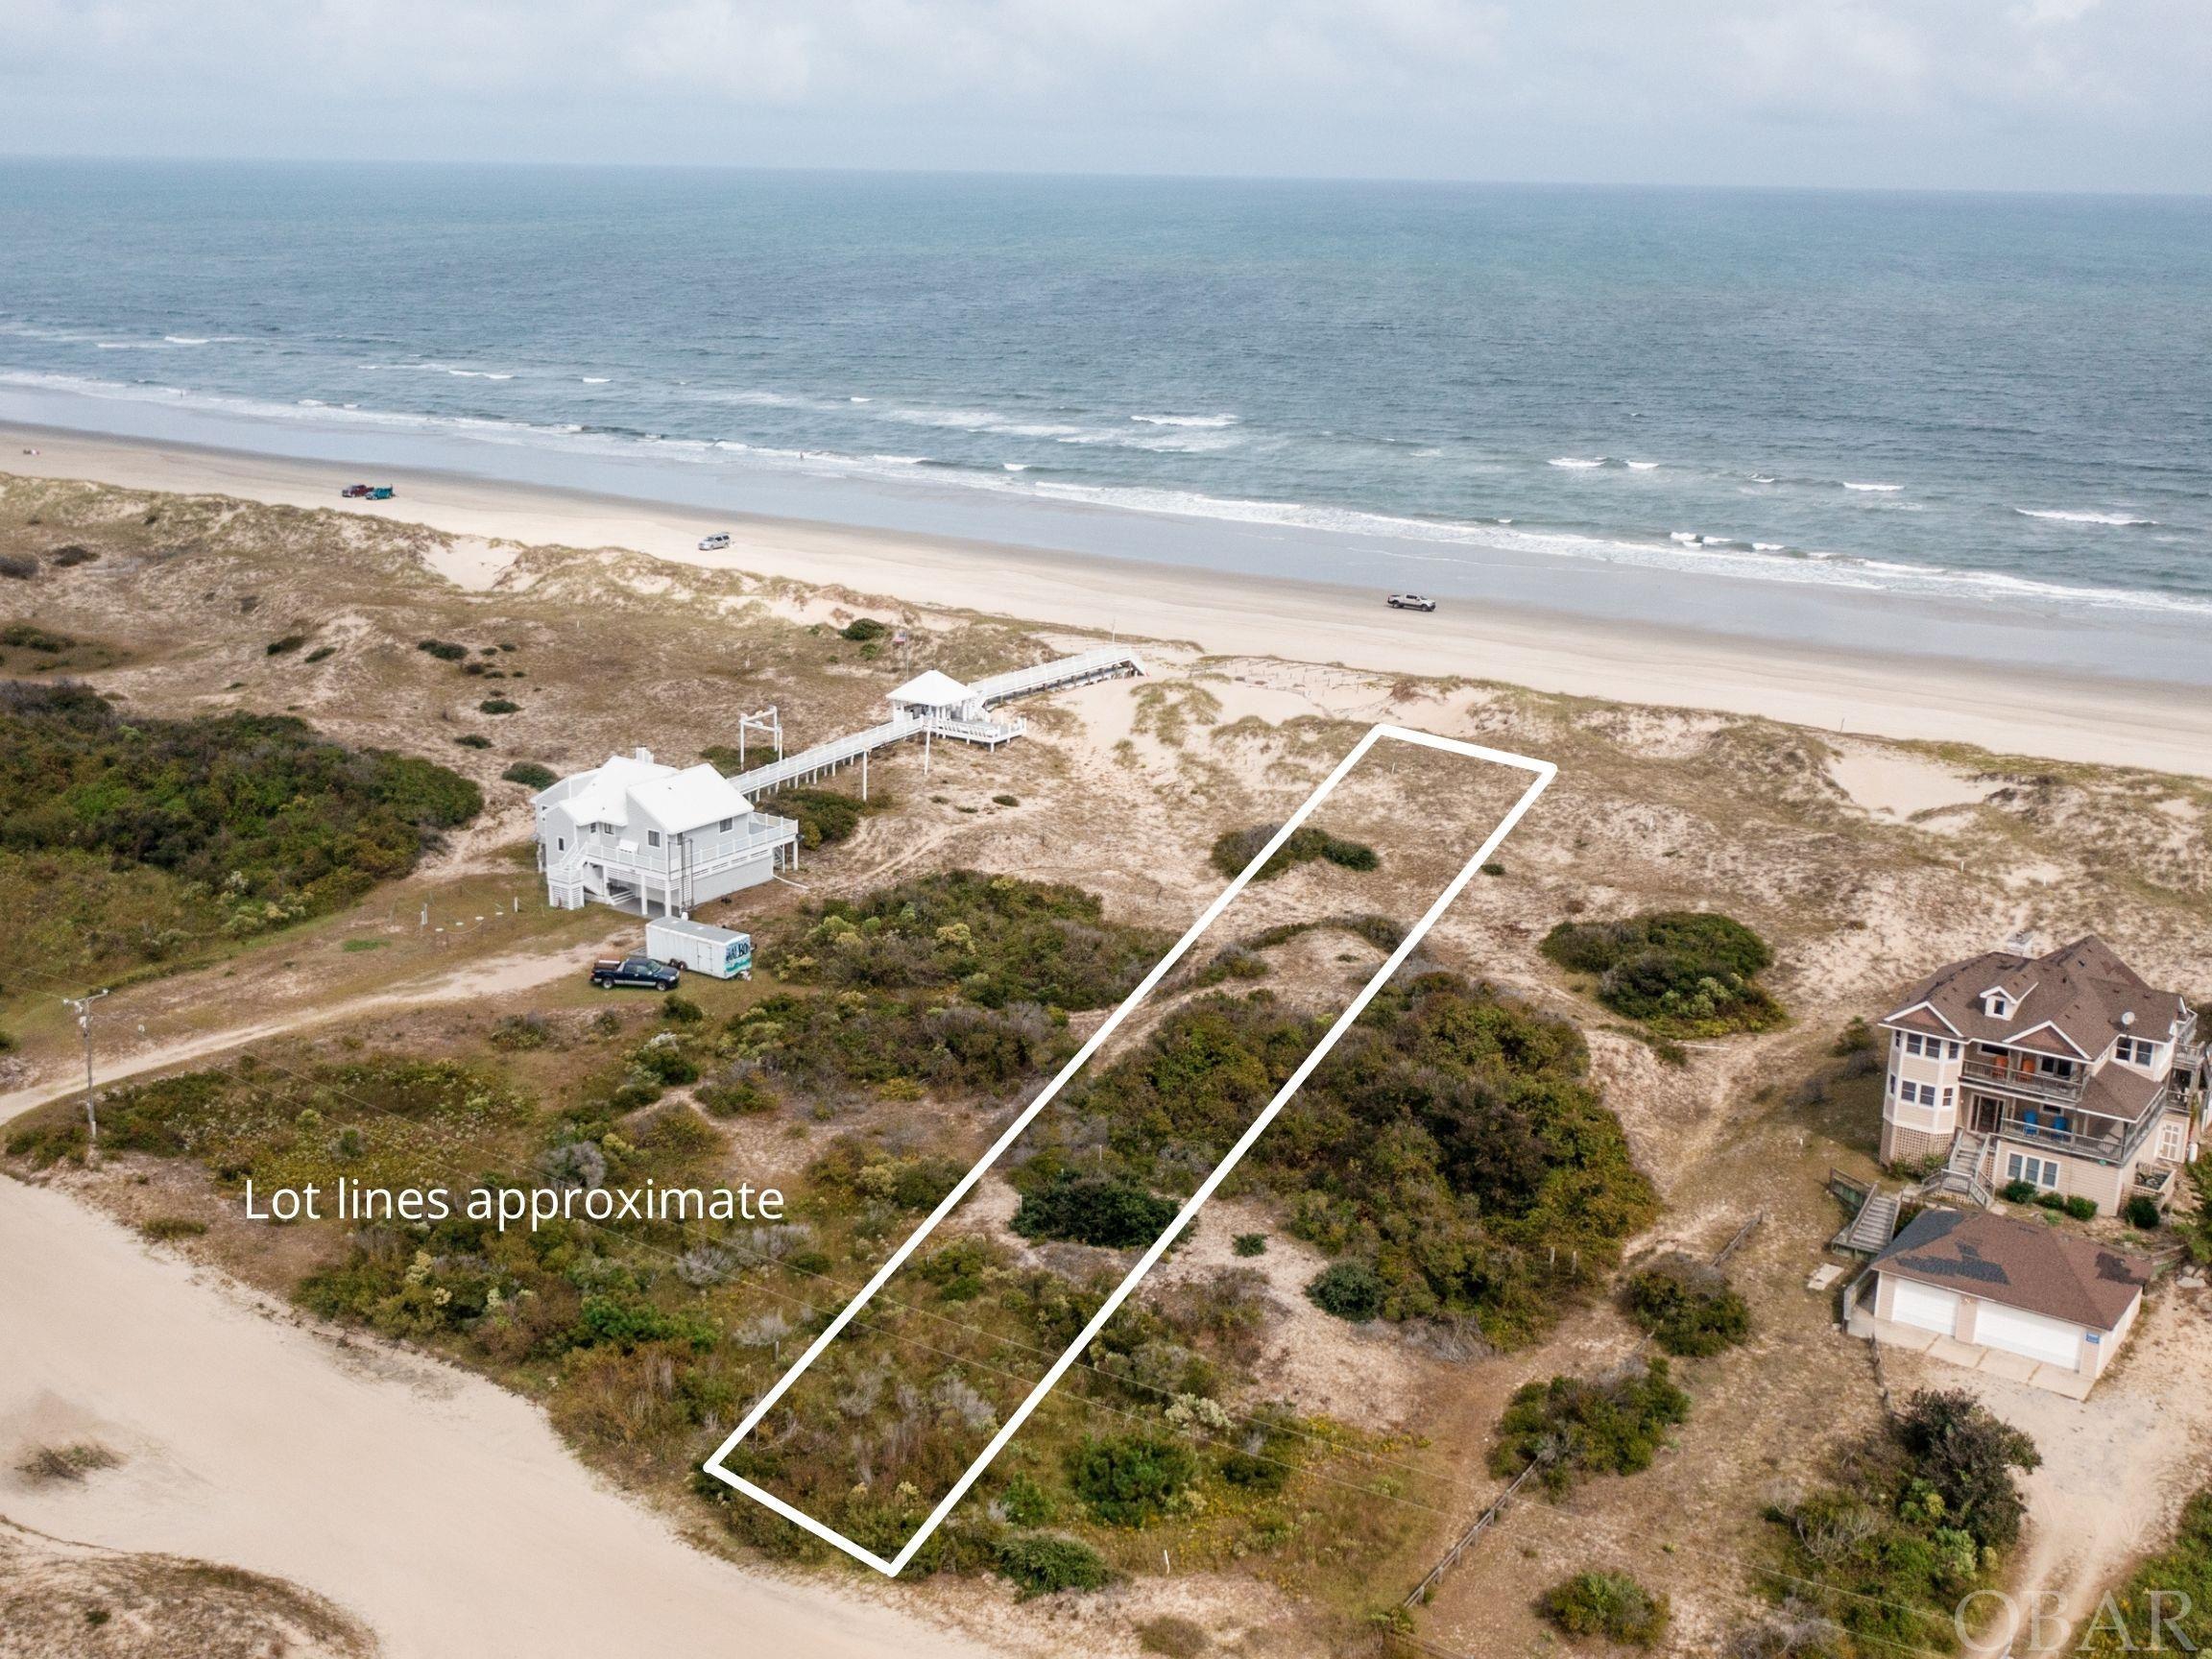 Build the vacation home of your dreams from this prime OCEANFRONT parcel! With 80 feet of ocean frontage, this spacious lot offers an established dune line and will boast expansive views of the ocean & beach from a home built in the future. Enjoy all the beauty that Carova Beach has to offer from the roaming wild horses to wide & white sandy beaches. This parcel is conveniently located less than 1 mile to the fire station, Carova Beach Park, and the Historic Coast Guard Station now serving as Twiddy's Sales office.